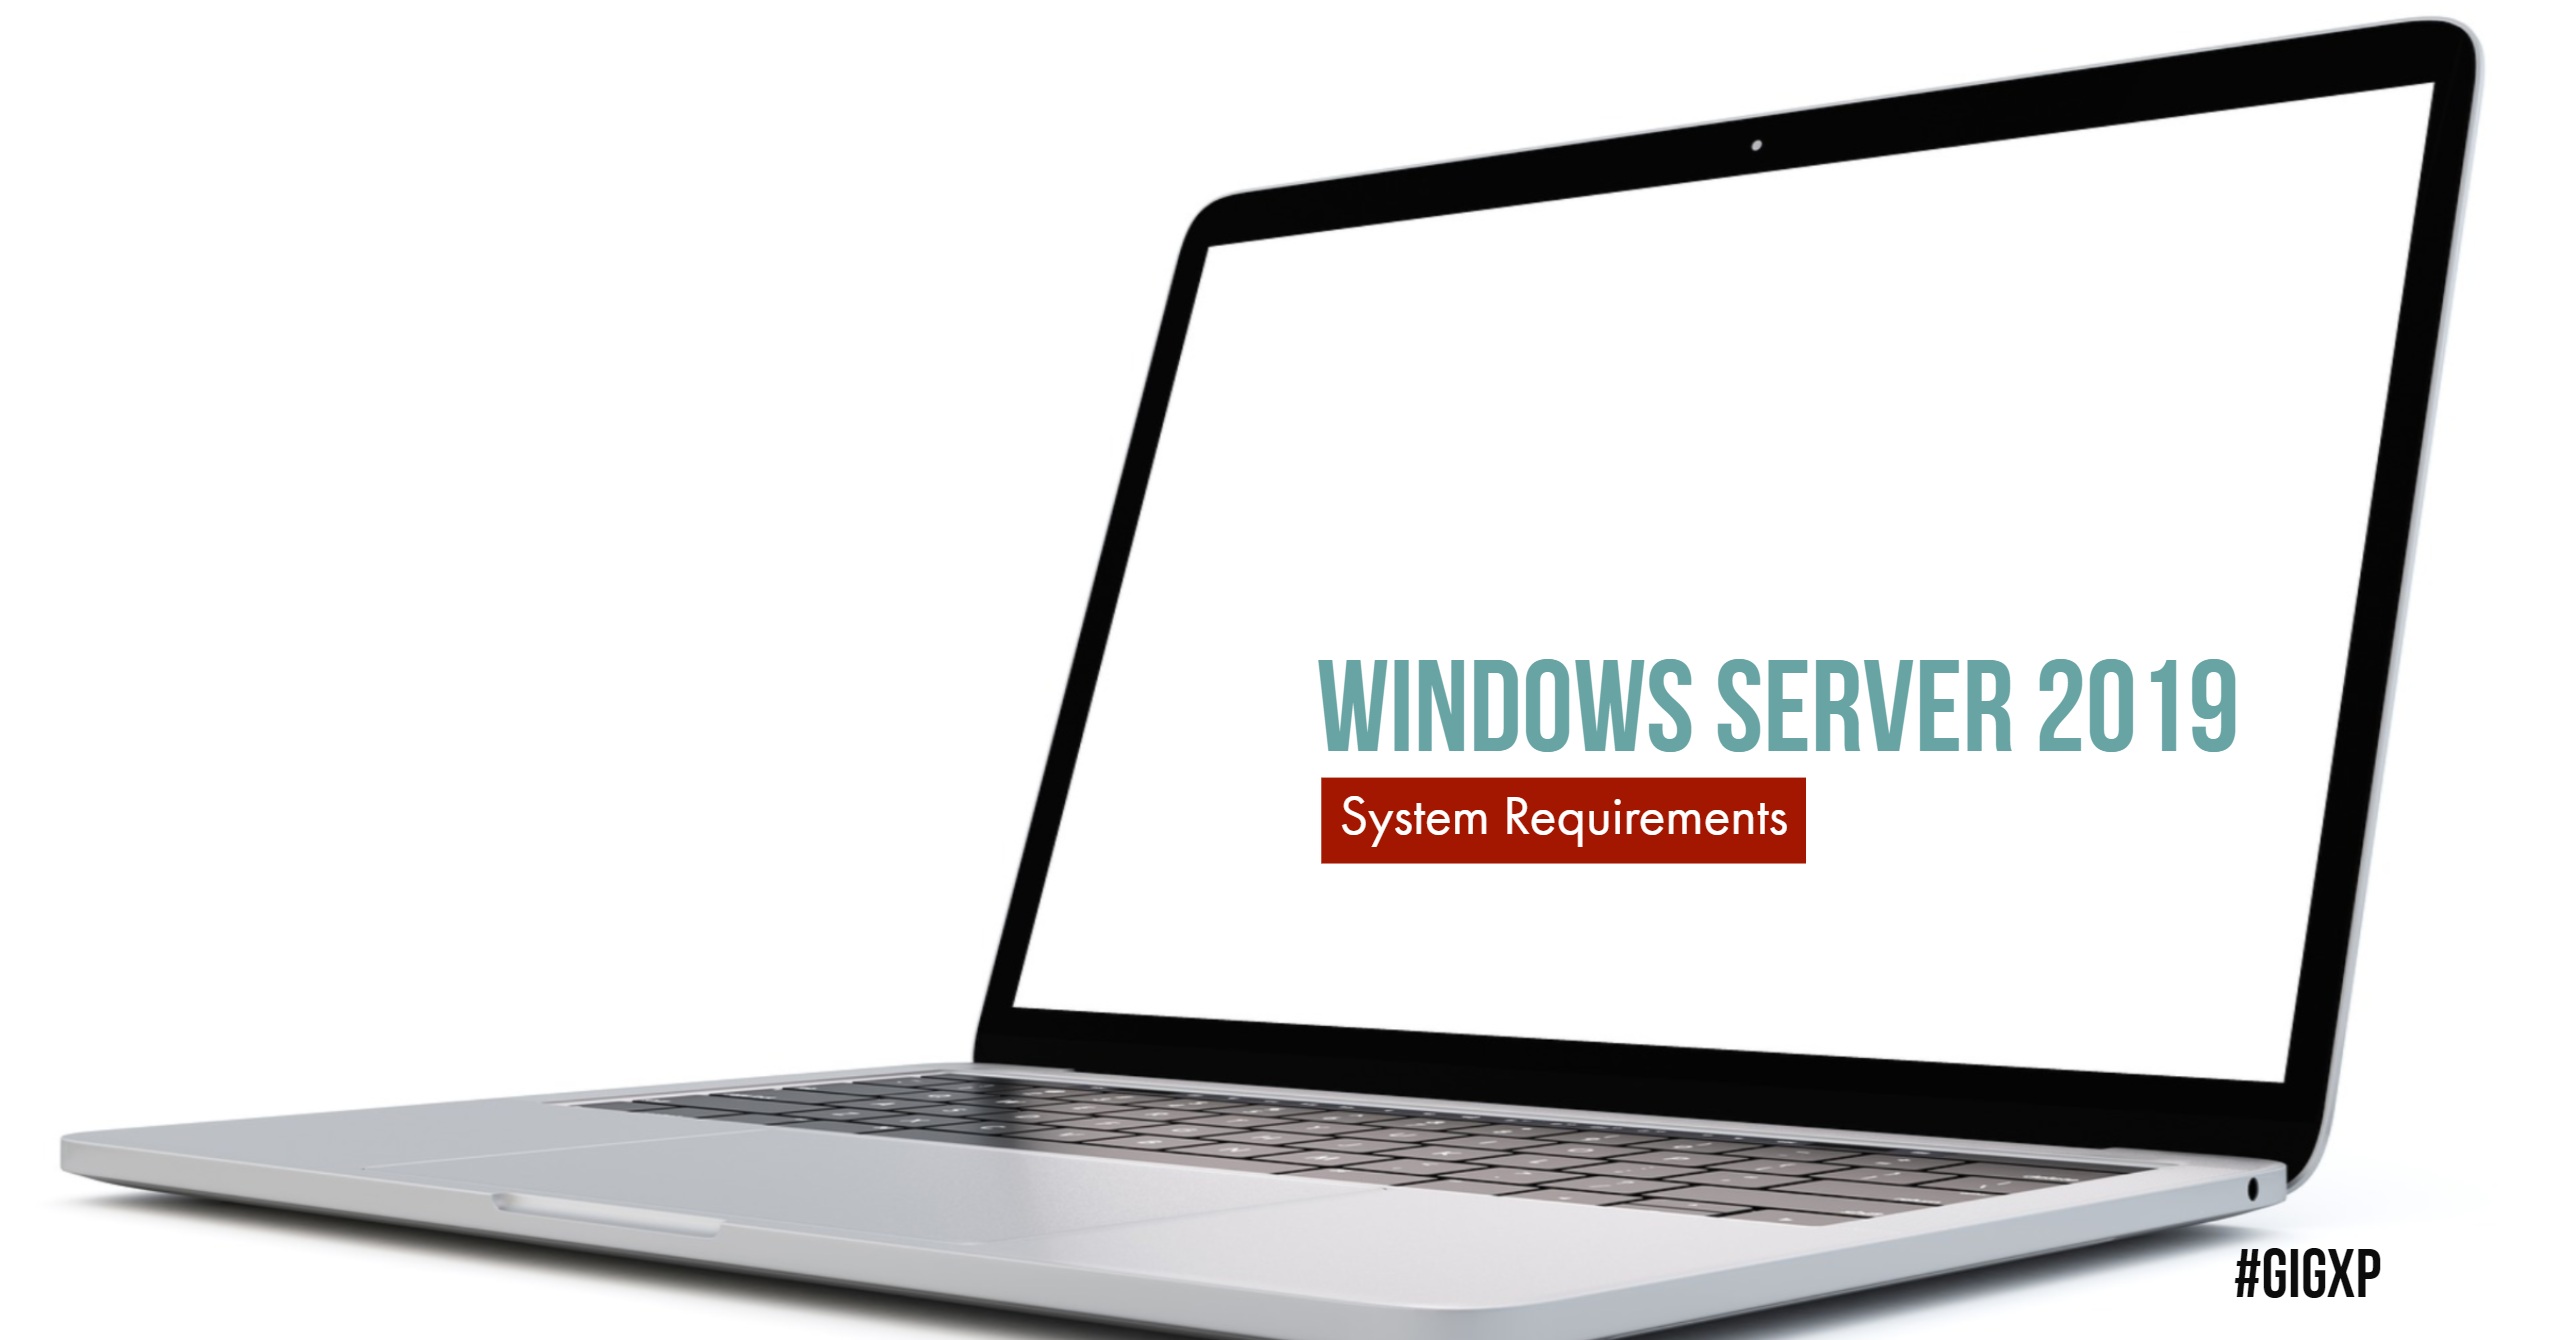 Windows Server 2019 System Requirements